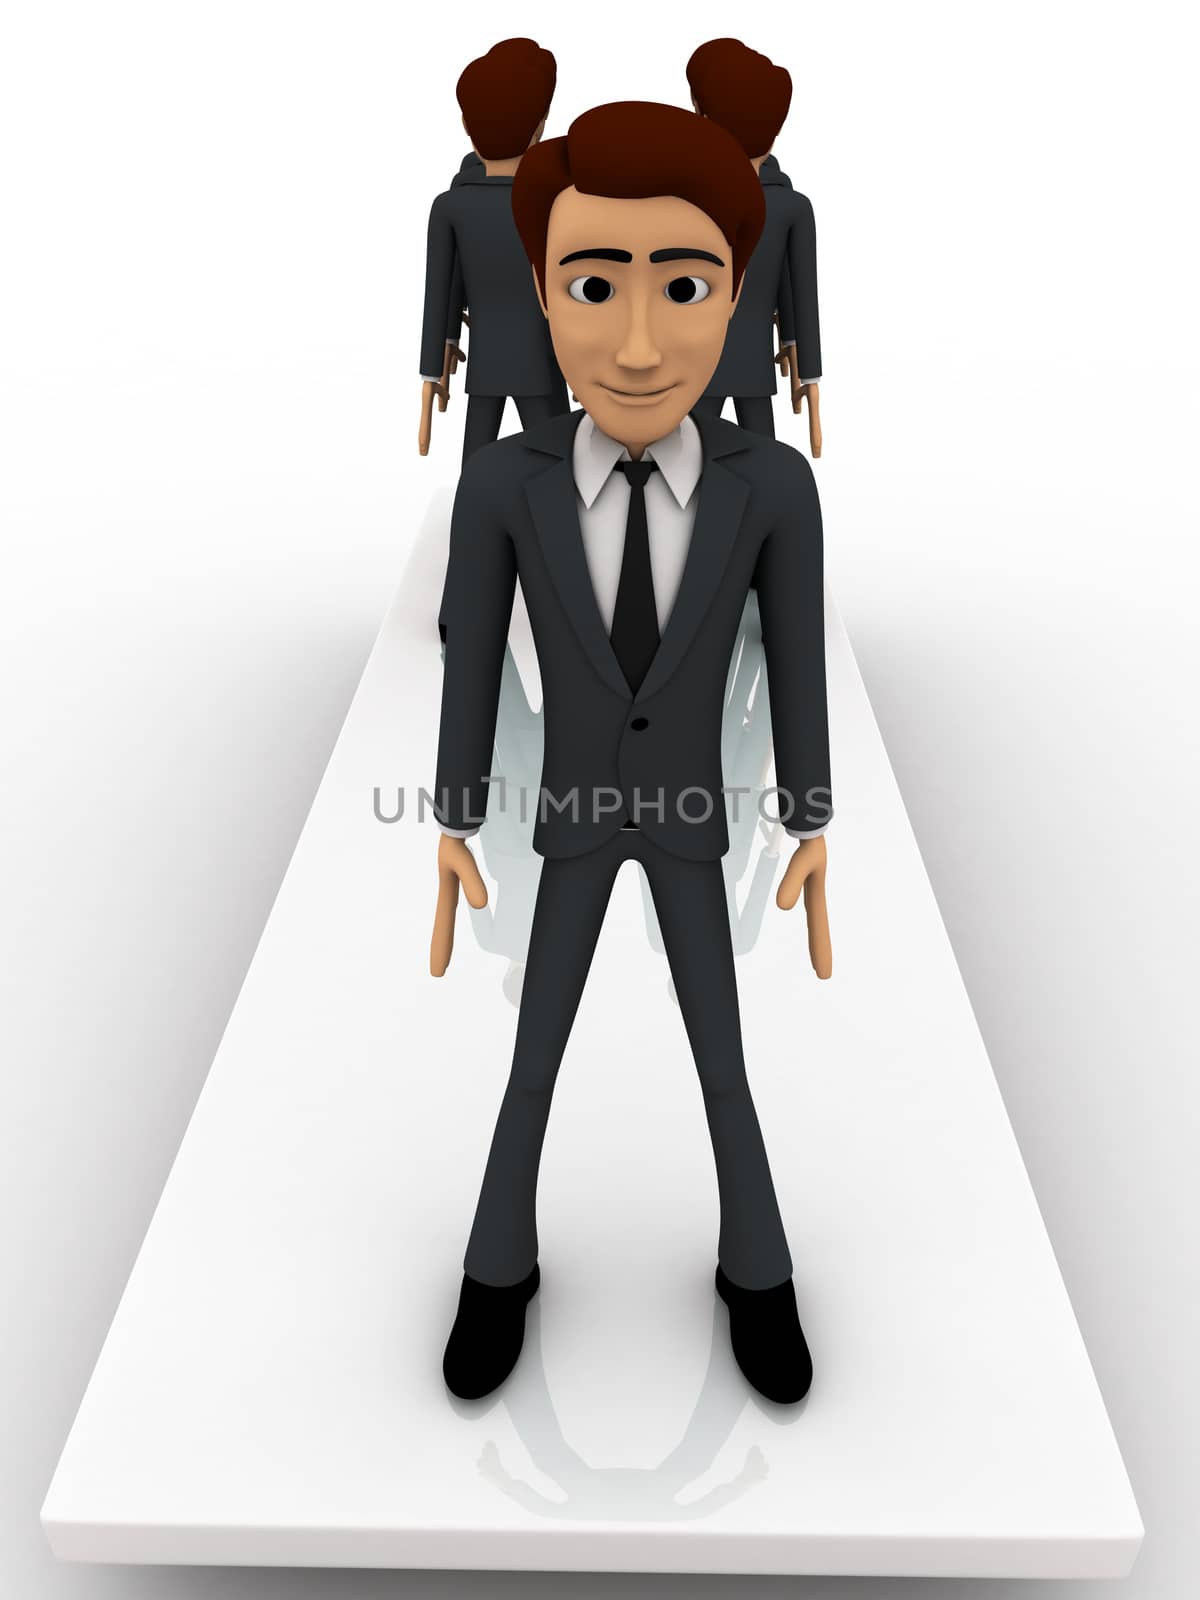 3d men standing seesaw one man on on side and group of men on ot by touchmenithin@gmail.com